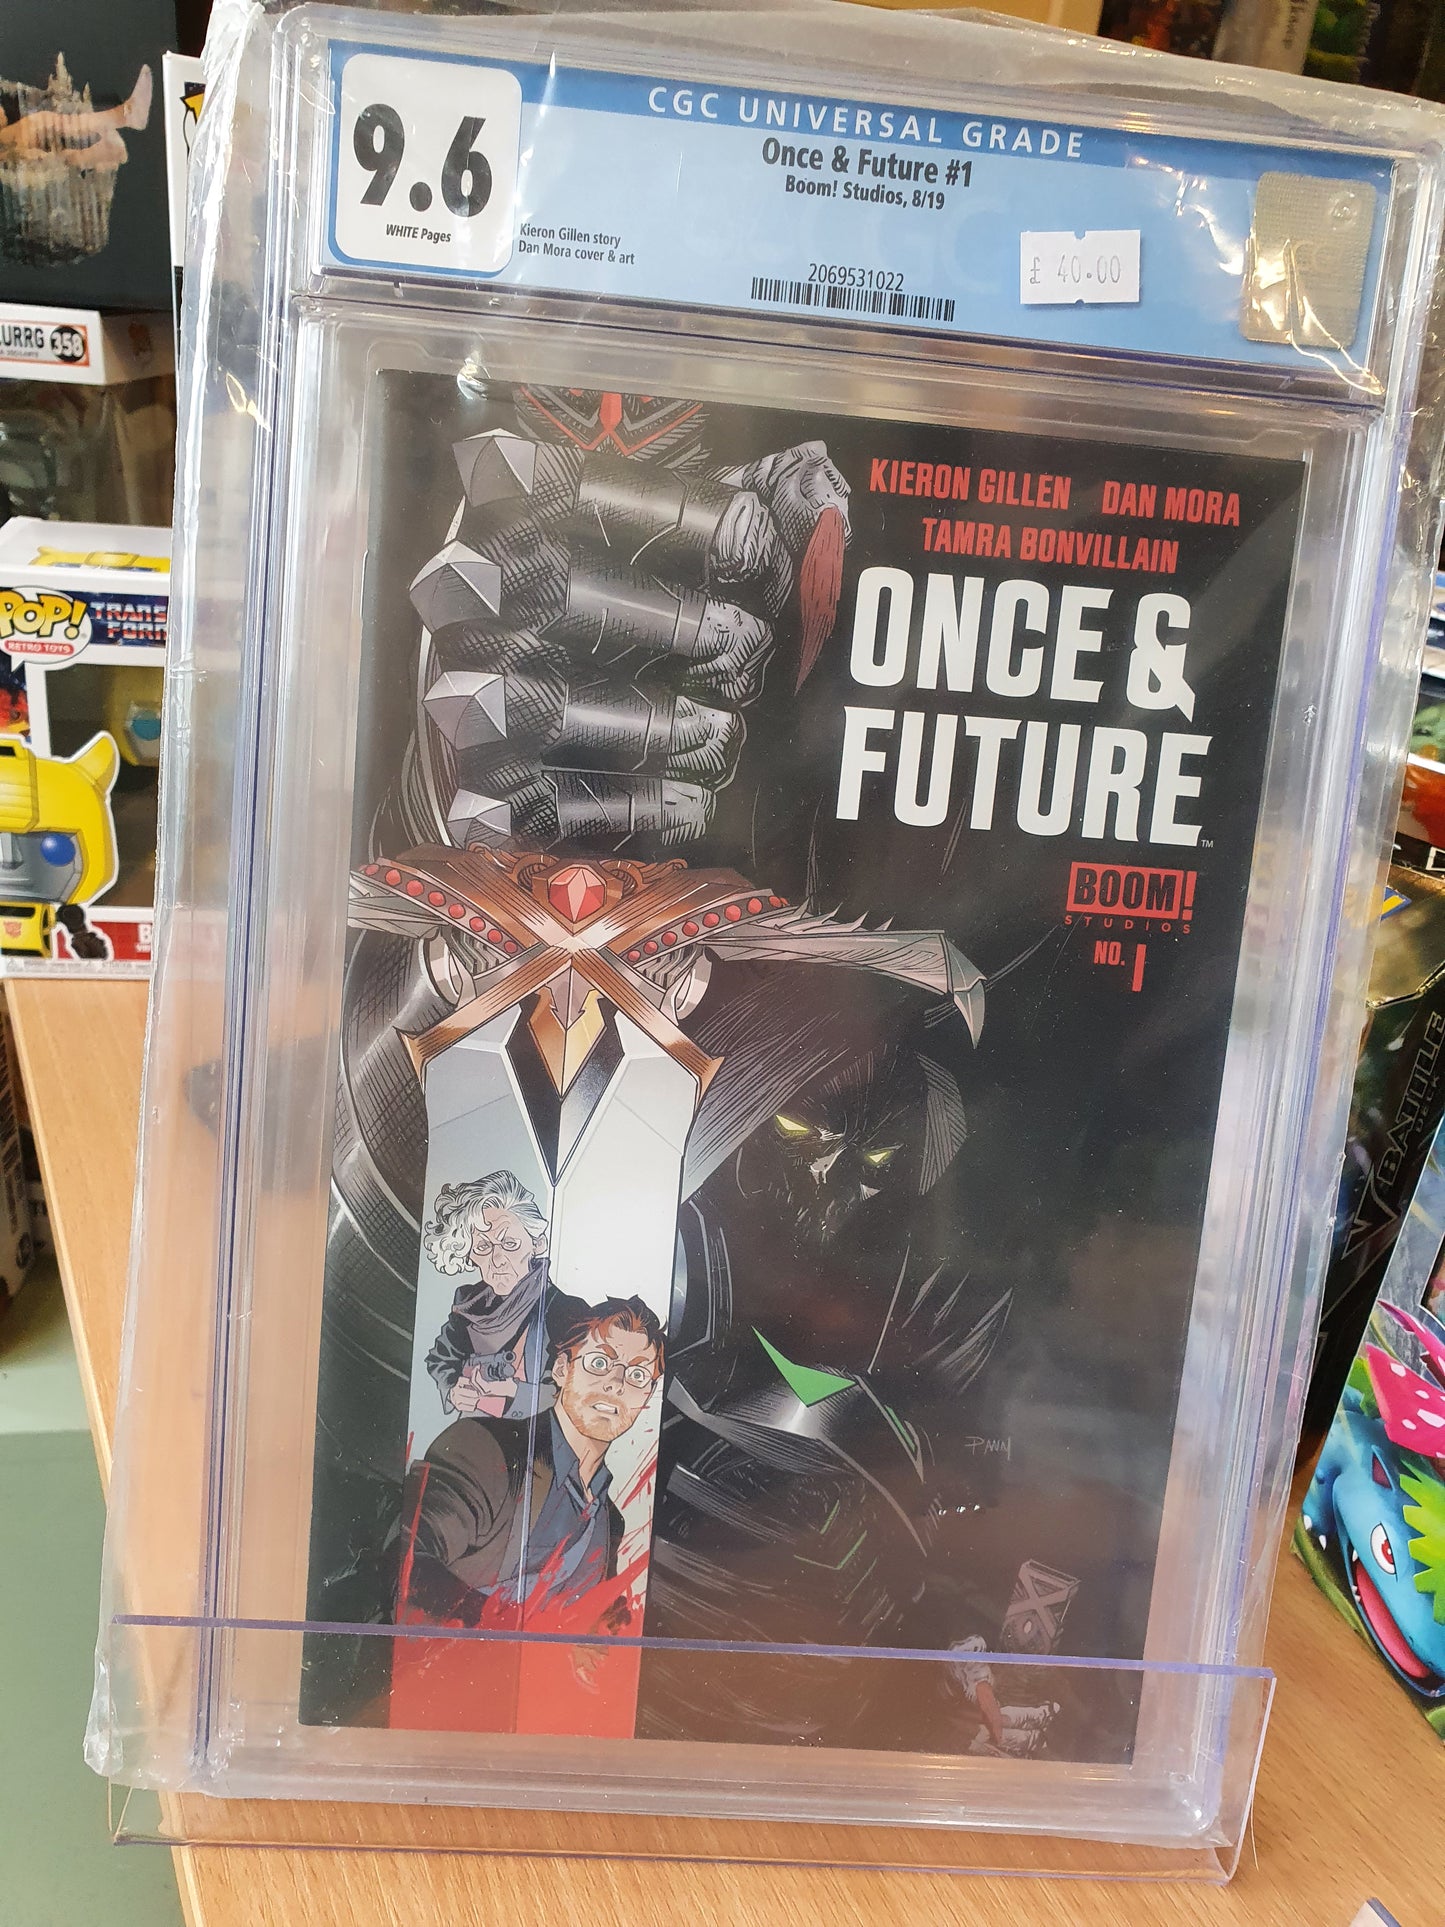 Once & Future #1 - CGC Graded 9.6